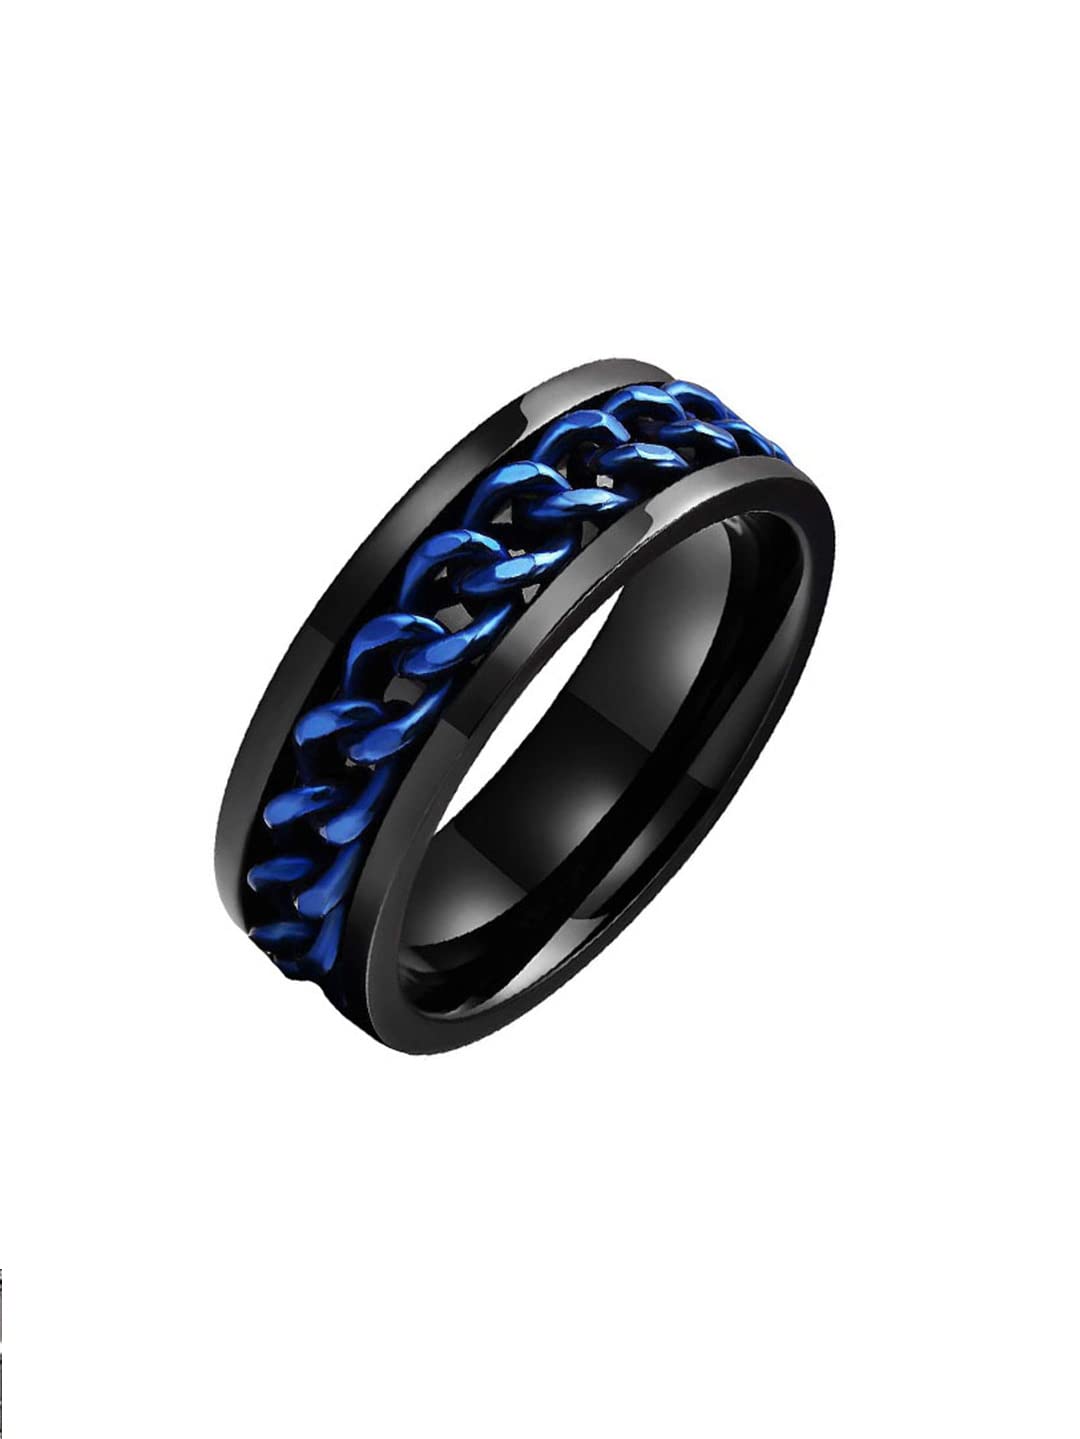 Yellow Chimes Rings for Men Black and Blue Colored Stainless Steel Band Designed Rings for Men and Boys